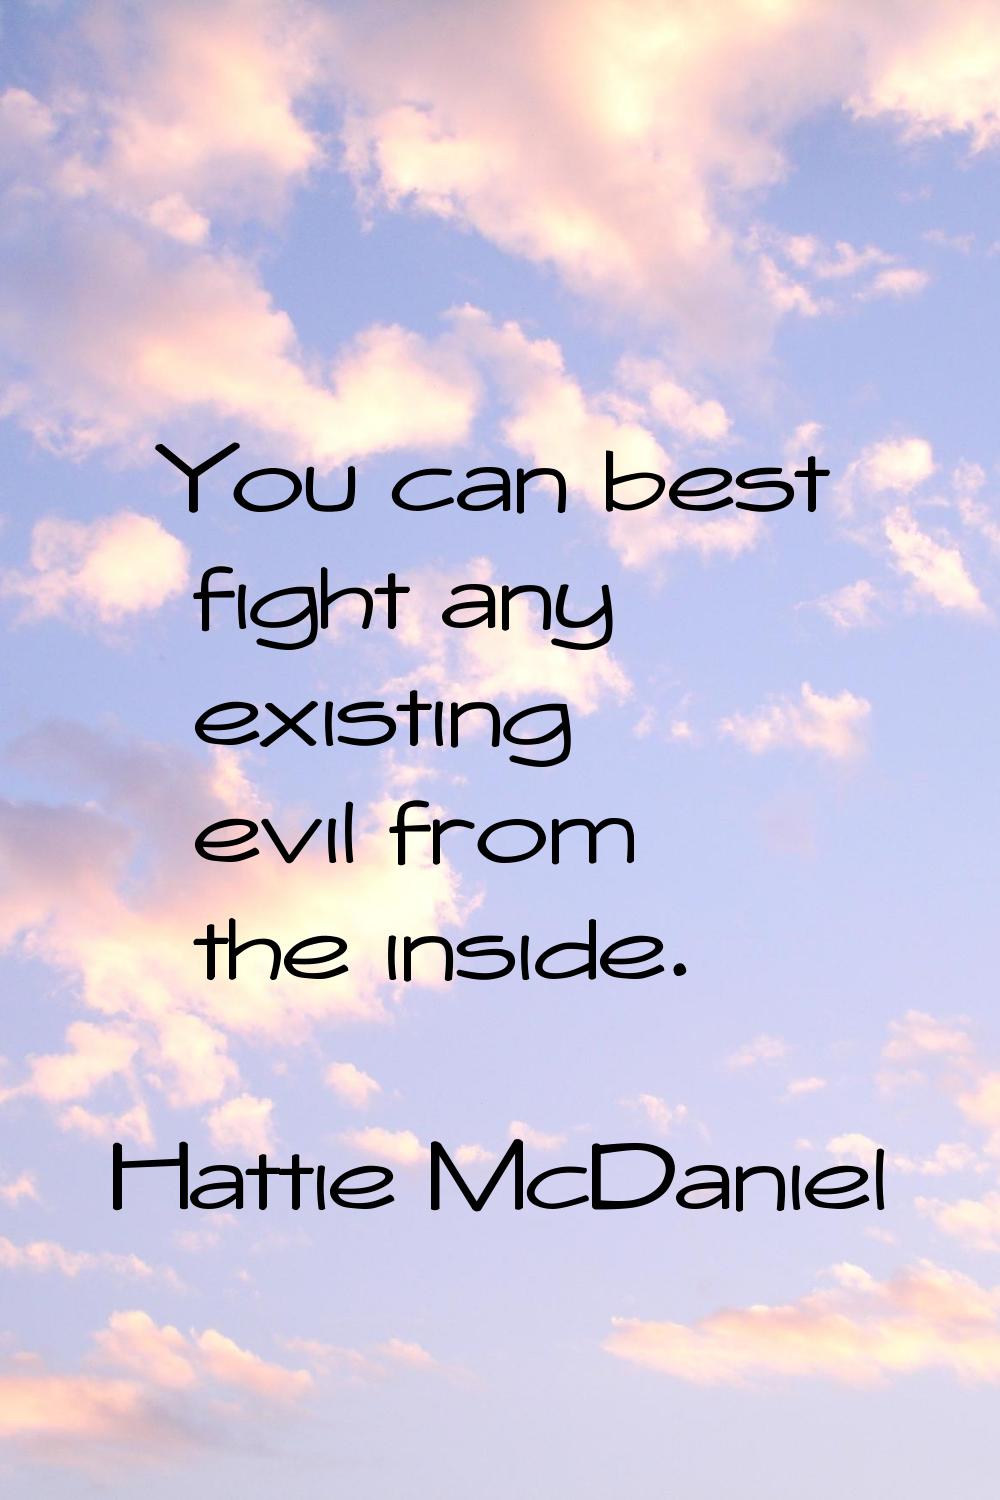 You can best fight any existing evil from the inside.